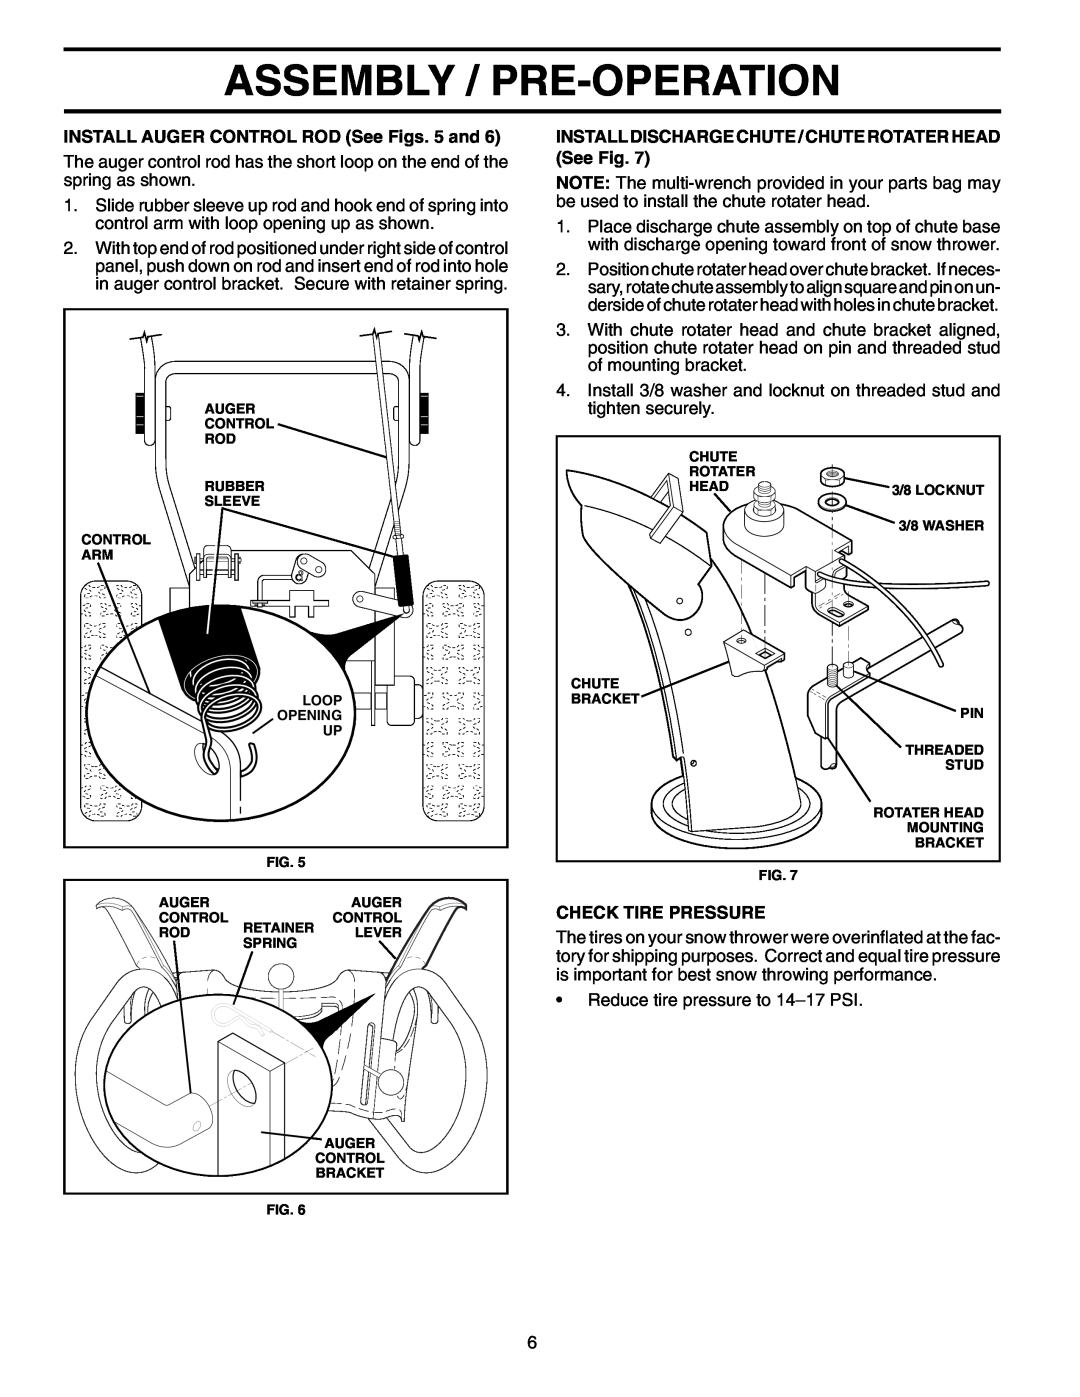 Poulan PP7527ES owner manual Assembly / Pre-Operation, INSTALL AUGER CONTROL ROD See Figs. 5 and, Check Tire Pressure 